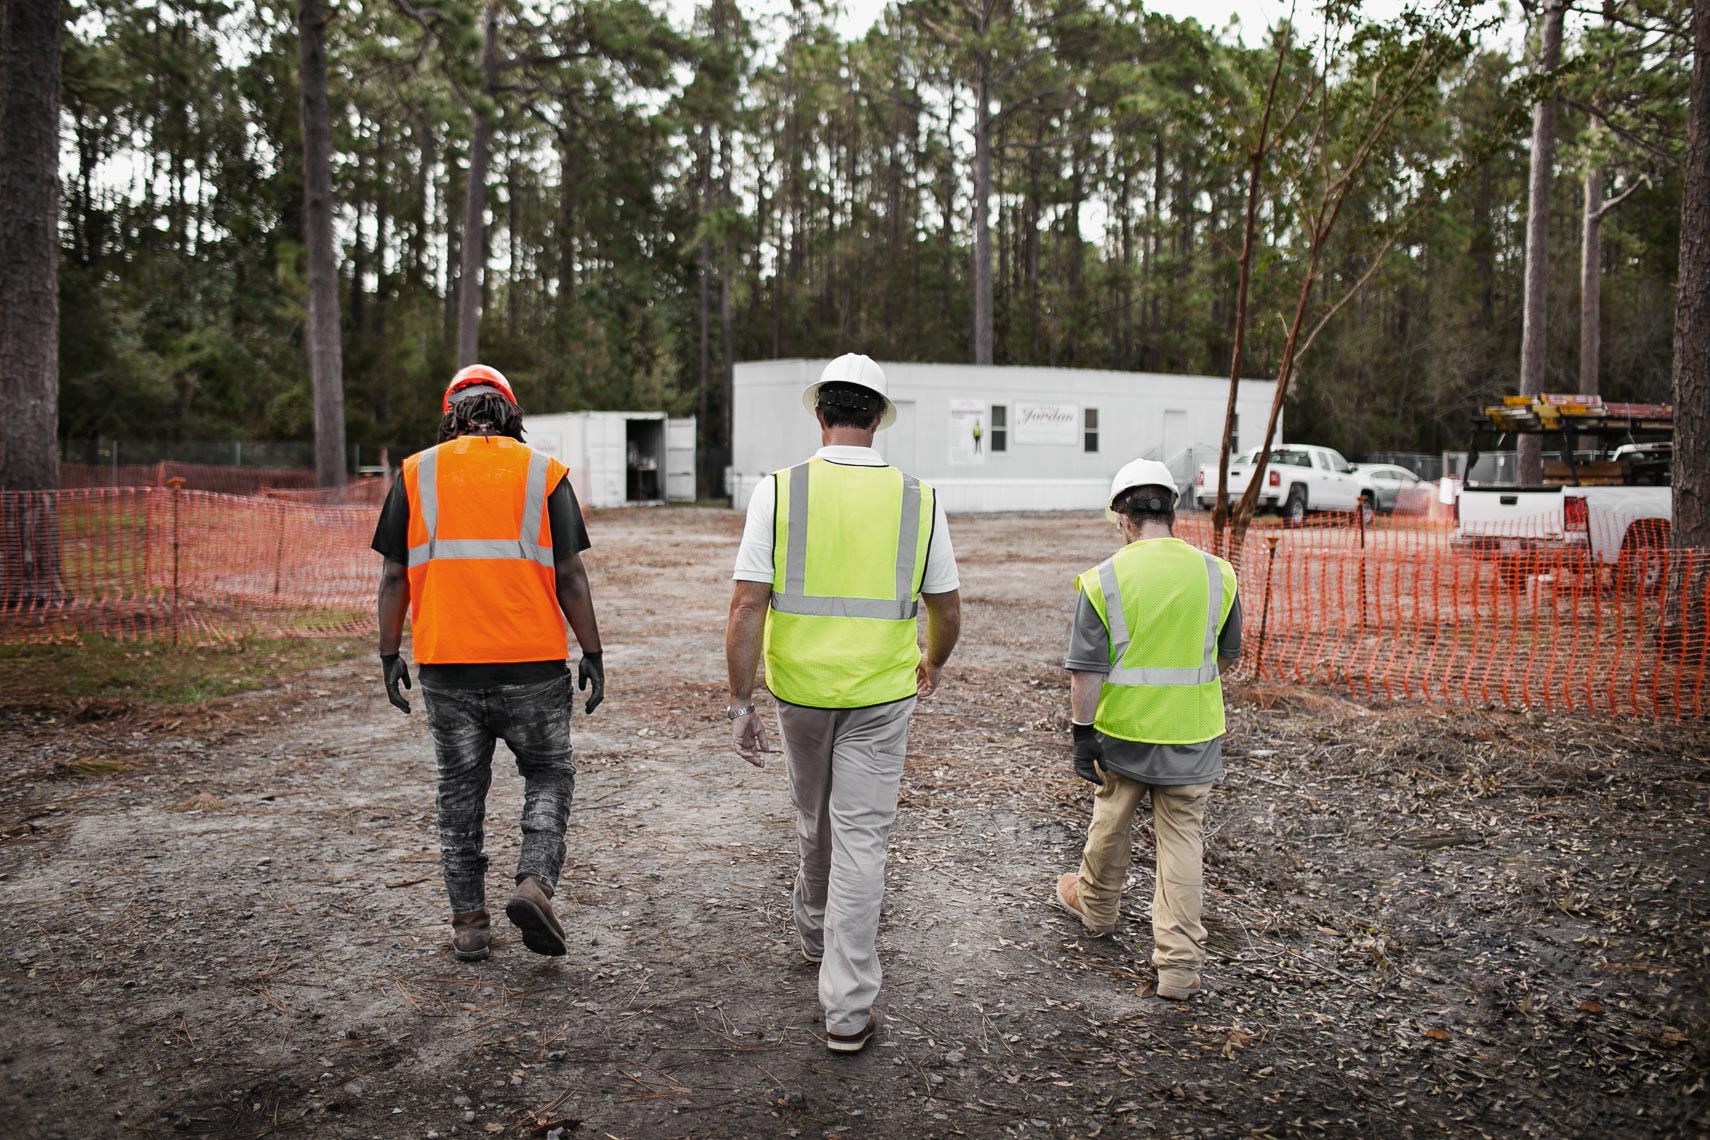 Hurricane_Florence_Cleanup_for_PeopleReady_20180925_photo_by_Justin_Kase_Conder_0095_Retouched_V02_Work.JPG